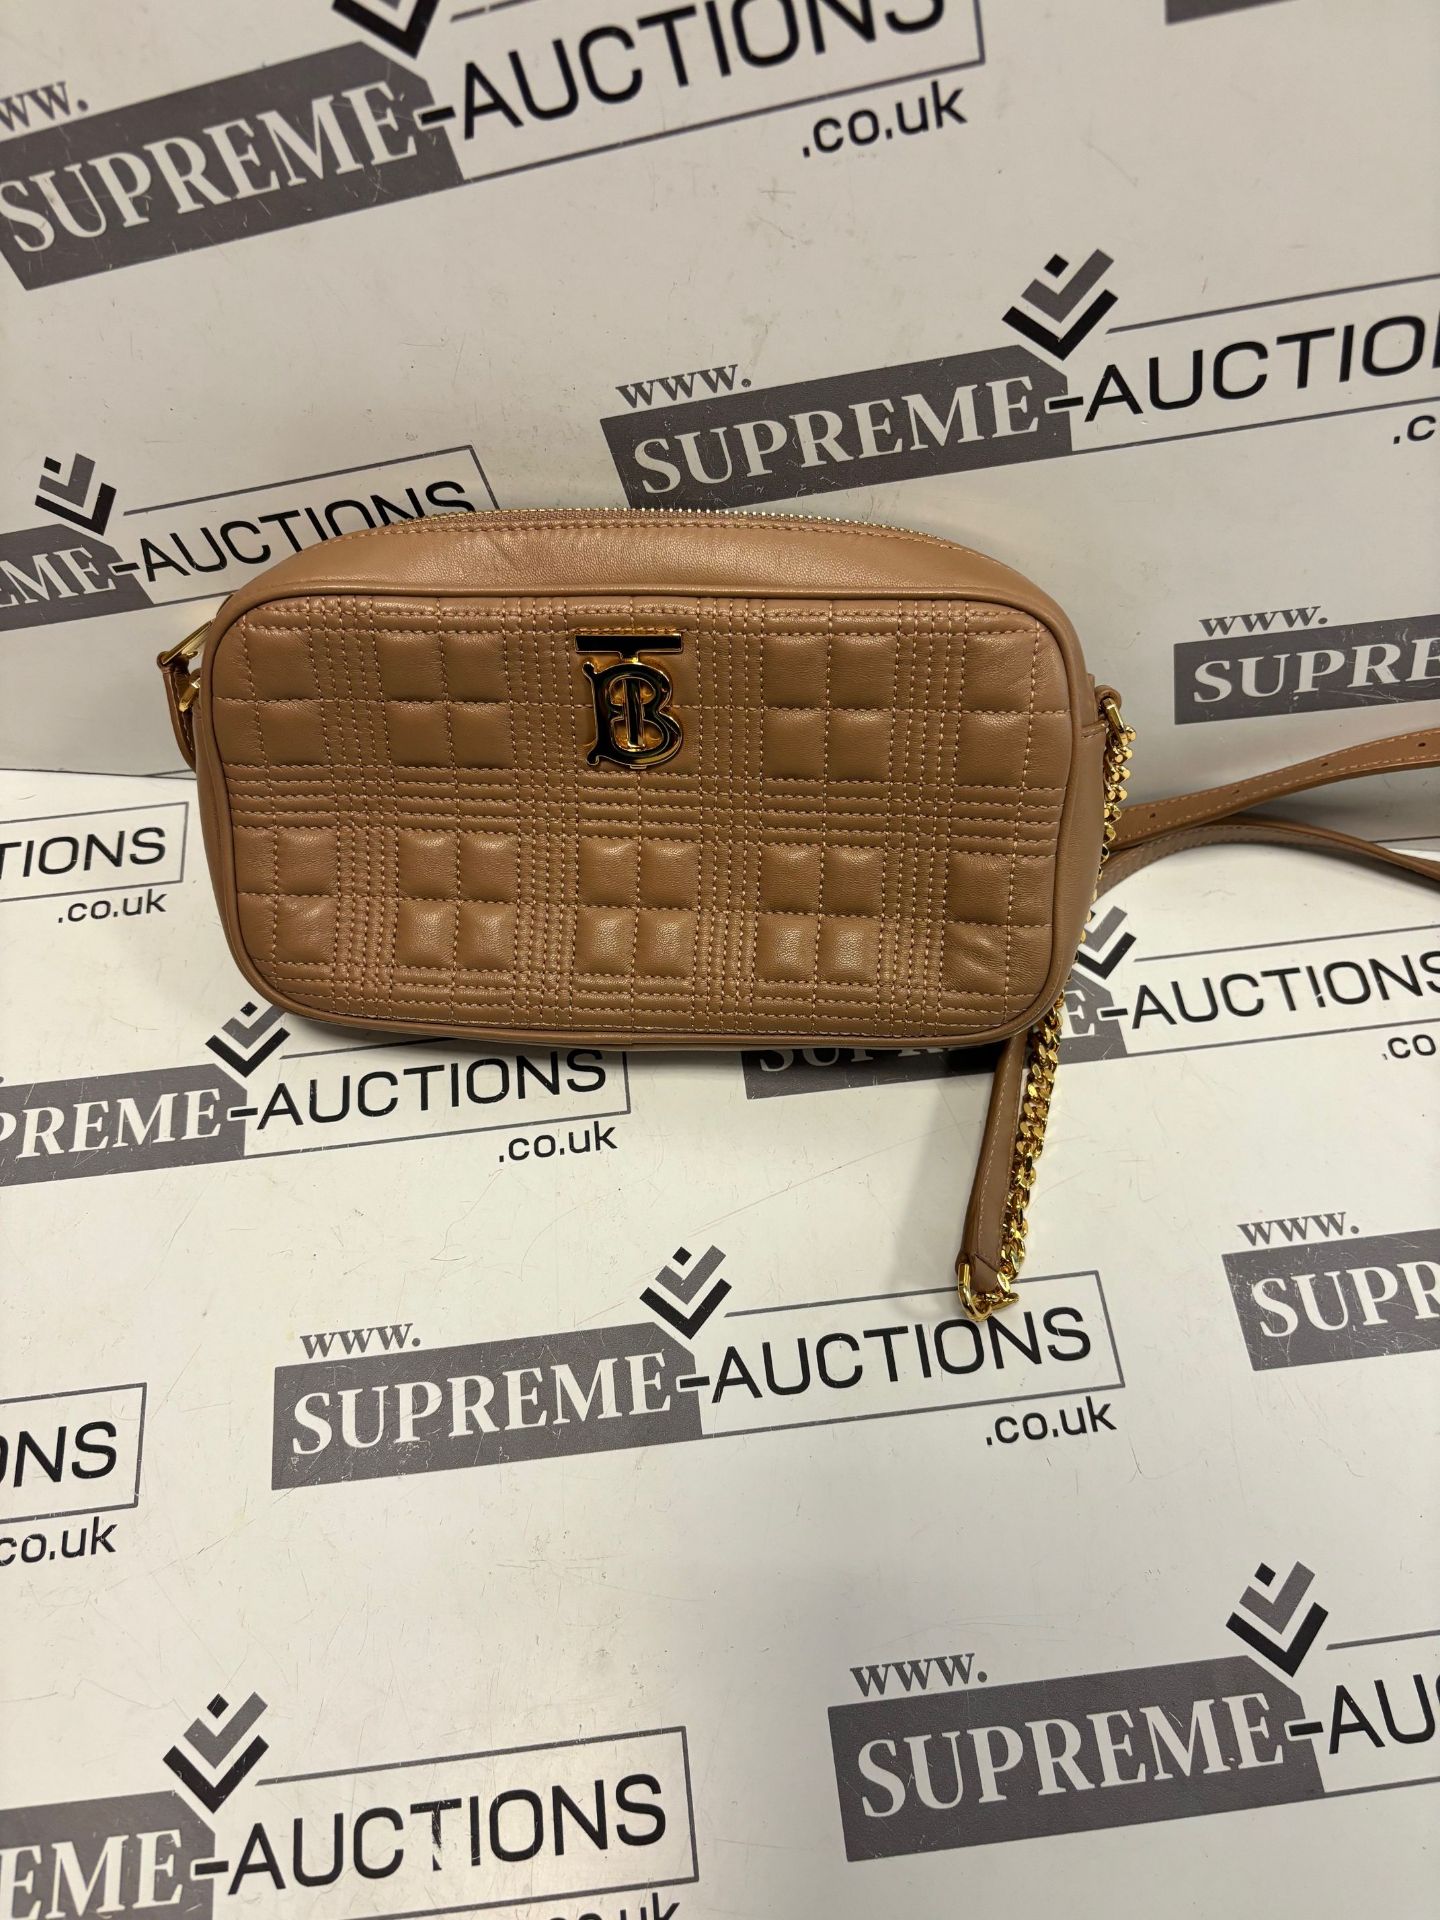 (No Vat) Burberry tb soft crossbody bag camel with Gold. Approx 23x12cm. - Image 5 of 7